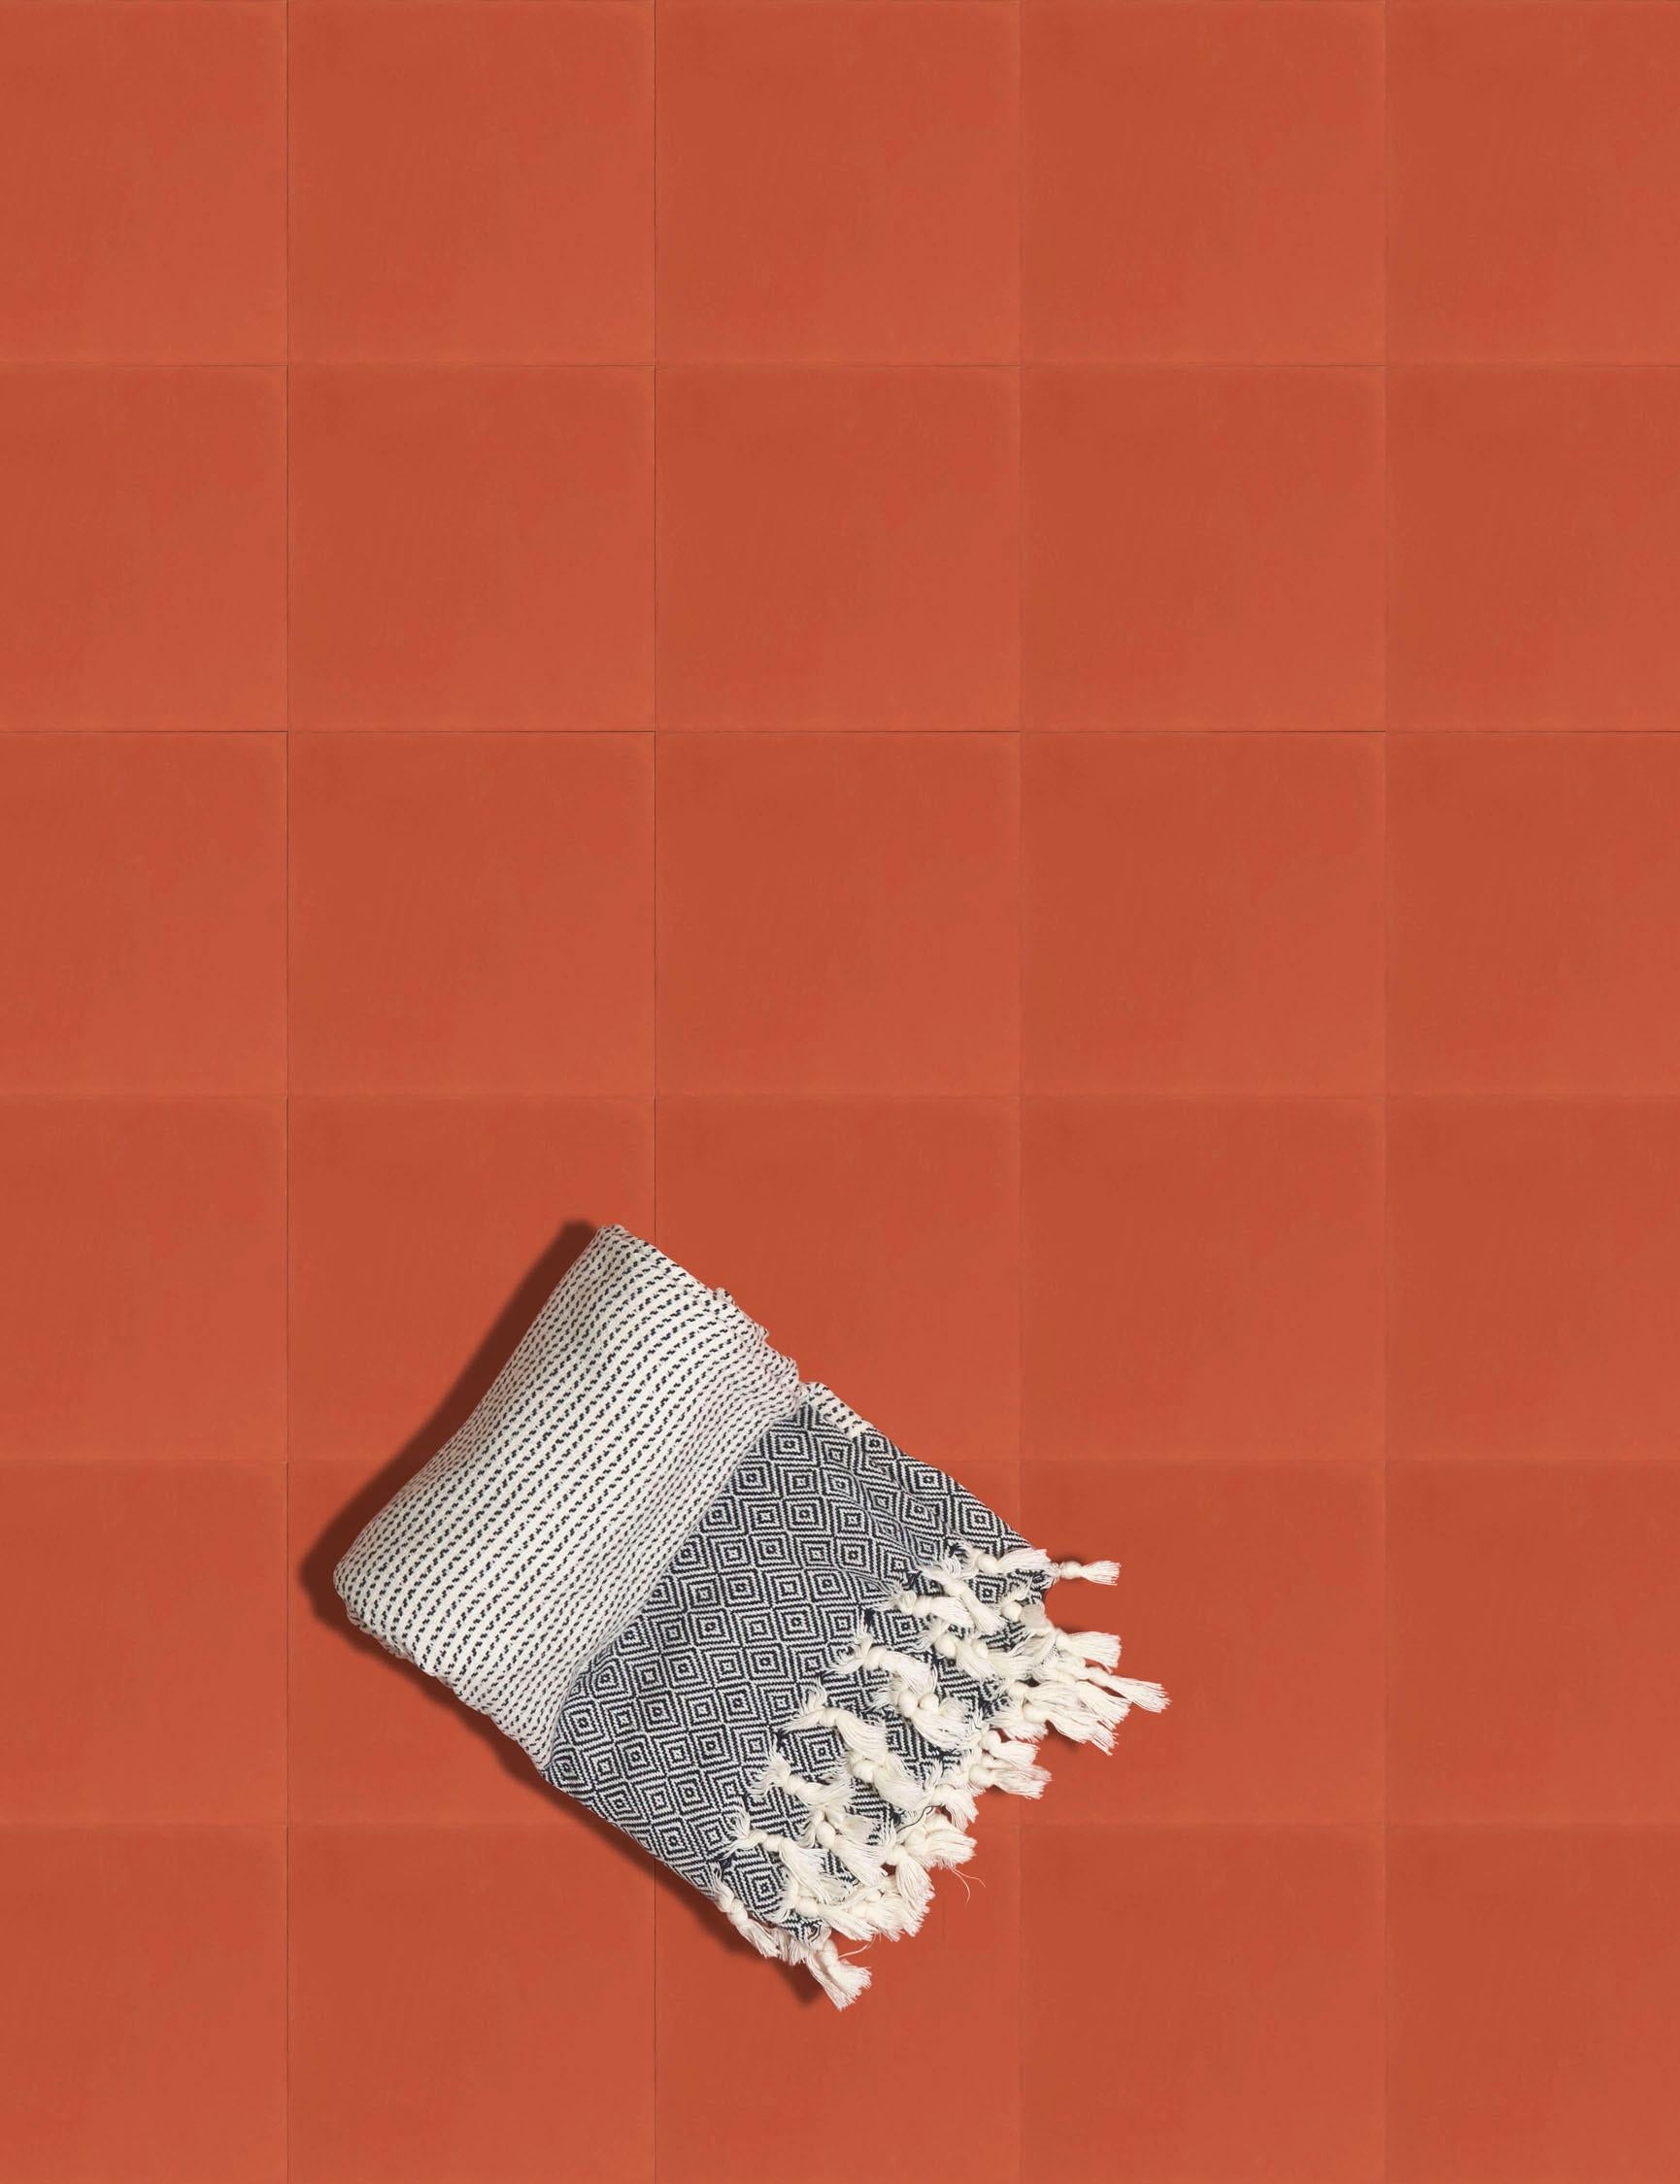 Available in our full palette in both cement and ceramic tile, these solid-shade square tiles can be coordinated with our patterned tiles for a perfectly calming mix.
Cement tiles
Type: Encaustic cement tile
Production process: Hydraulic pressing